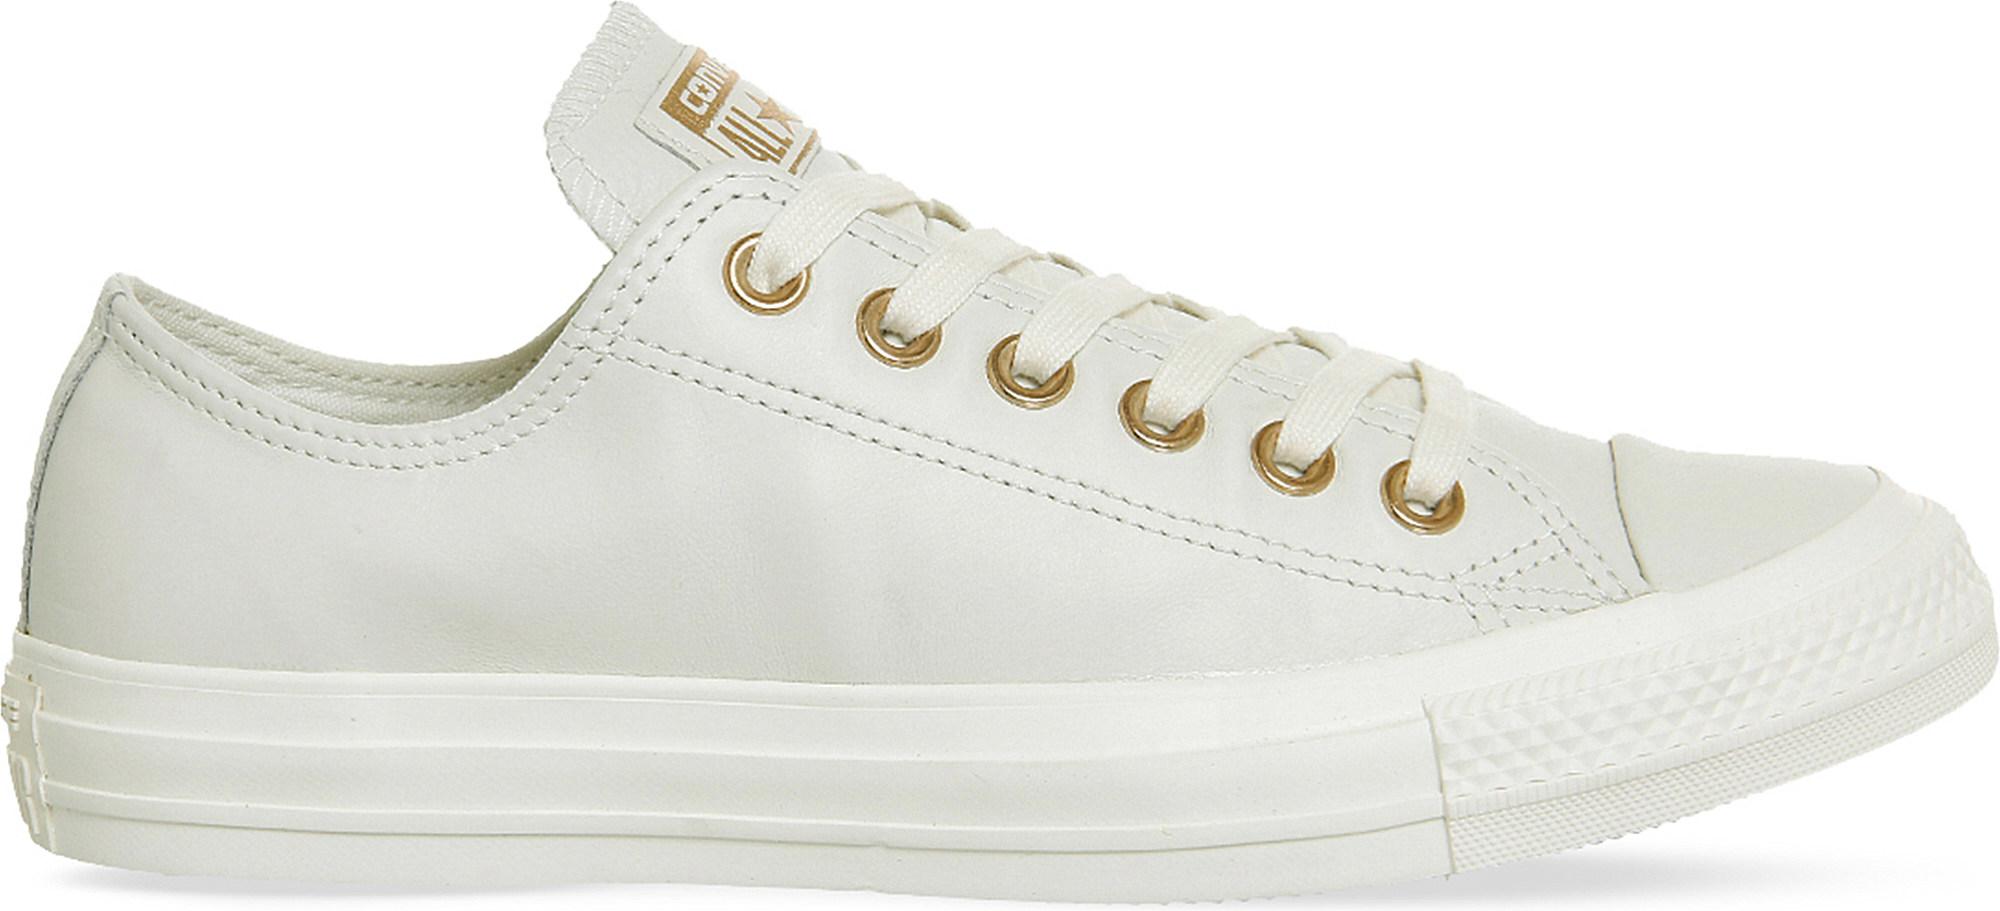 white leather converse rose gold eyelets